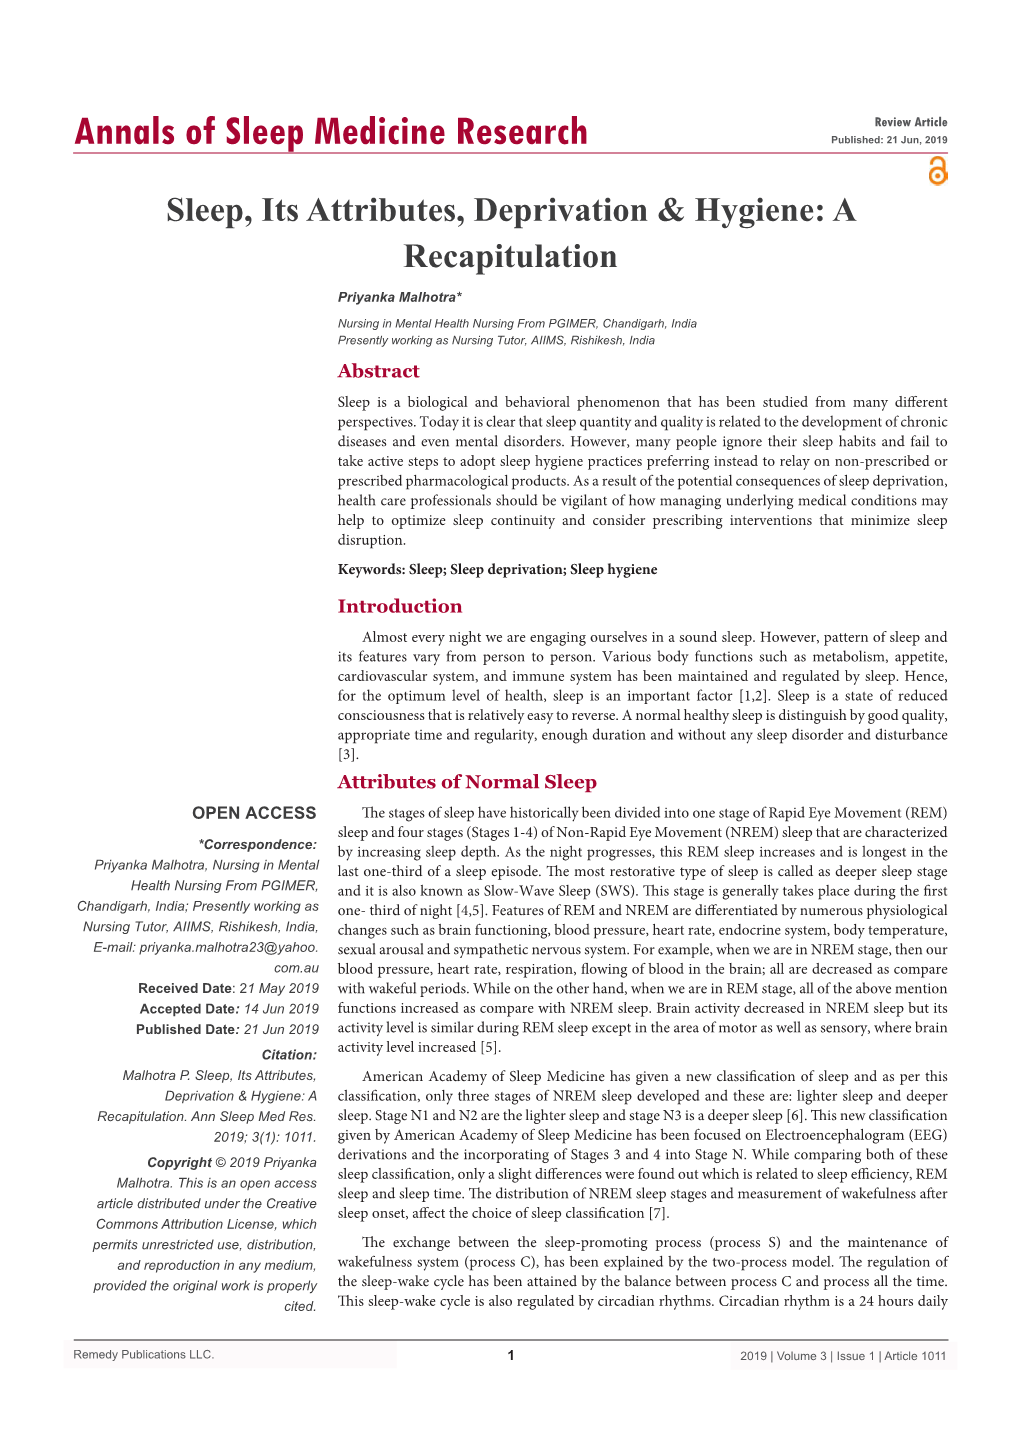 Sleep, Its Attributes, Deprivation & Hygiene: a Recapitulation